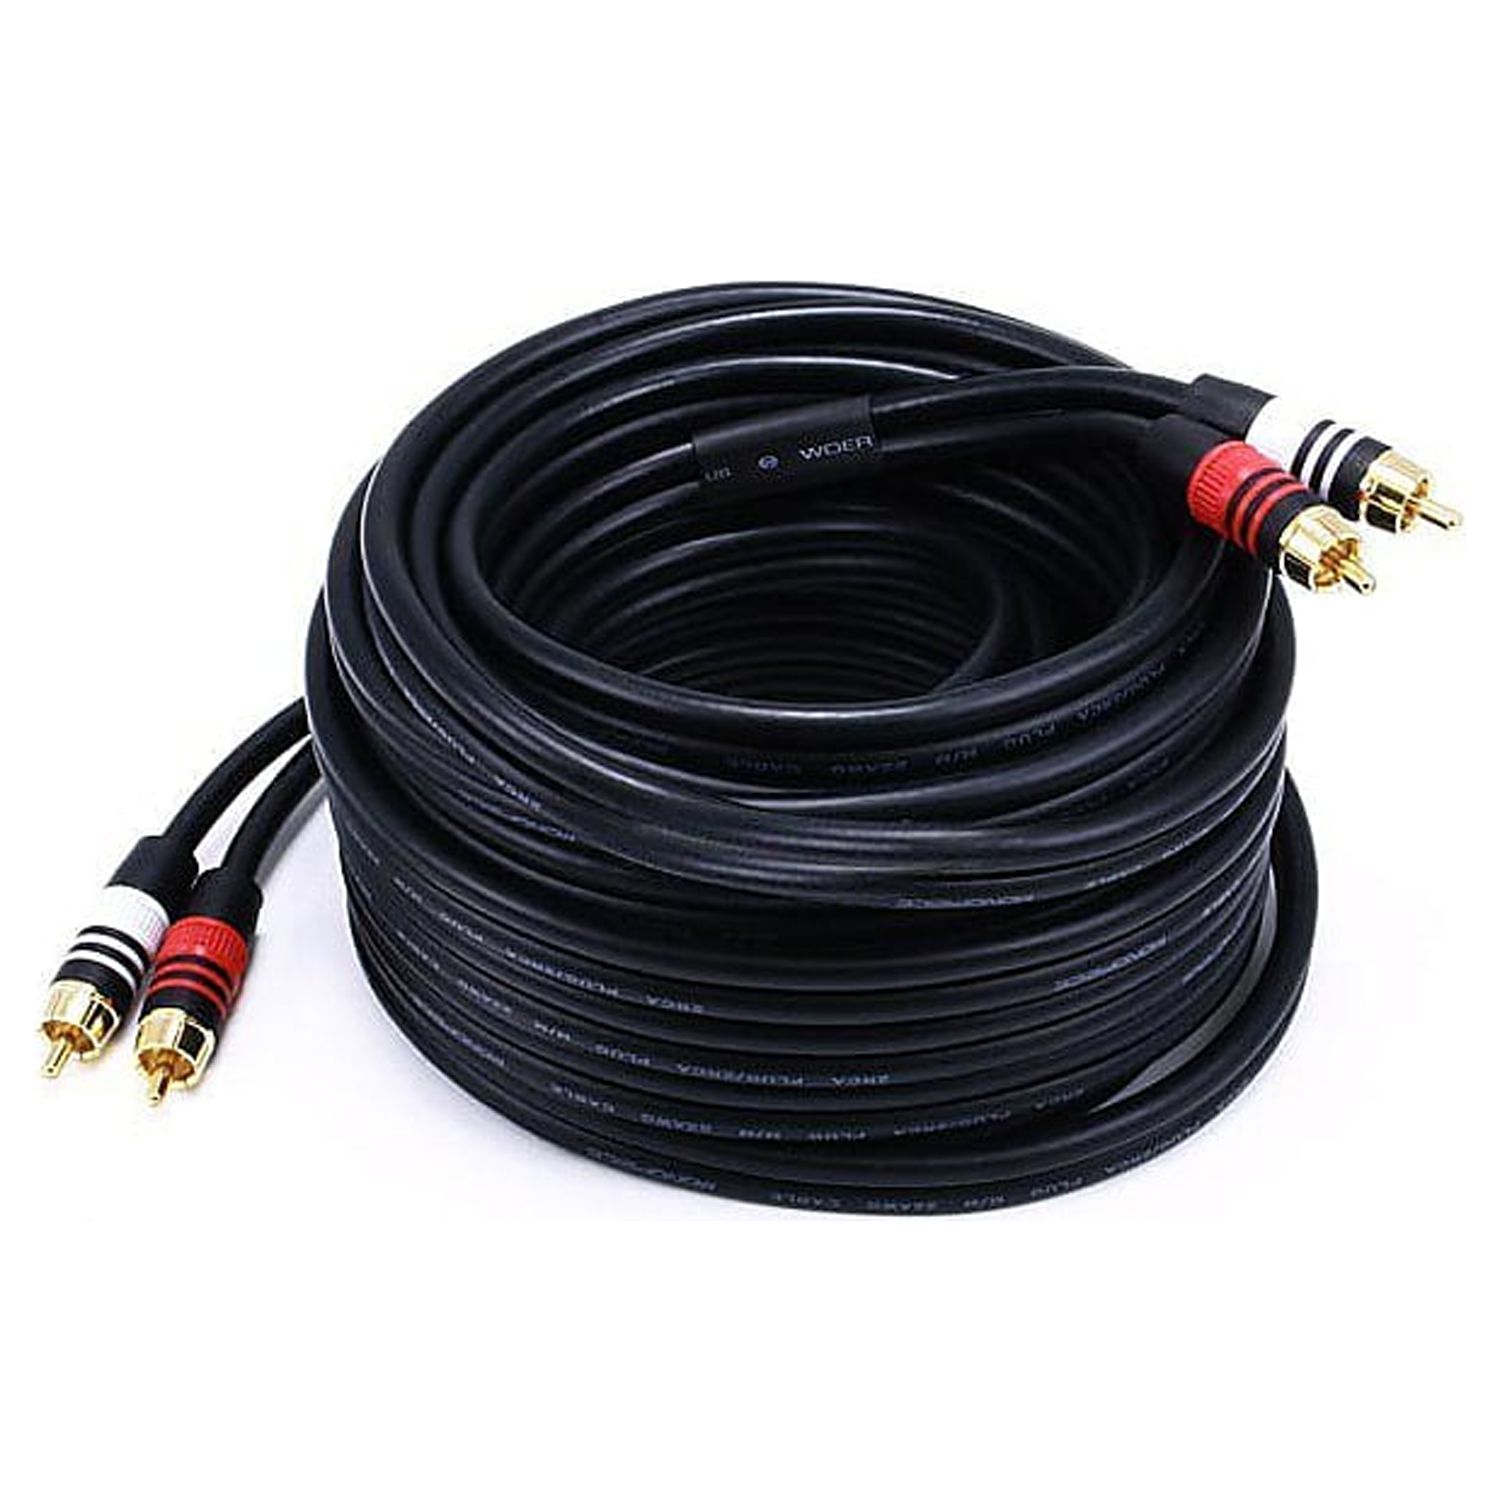 Monoprice Premium 35' 2-RCA Plug Male to Male 22AWG Cable Black 102867 - image 1 of 2